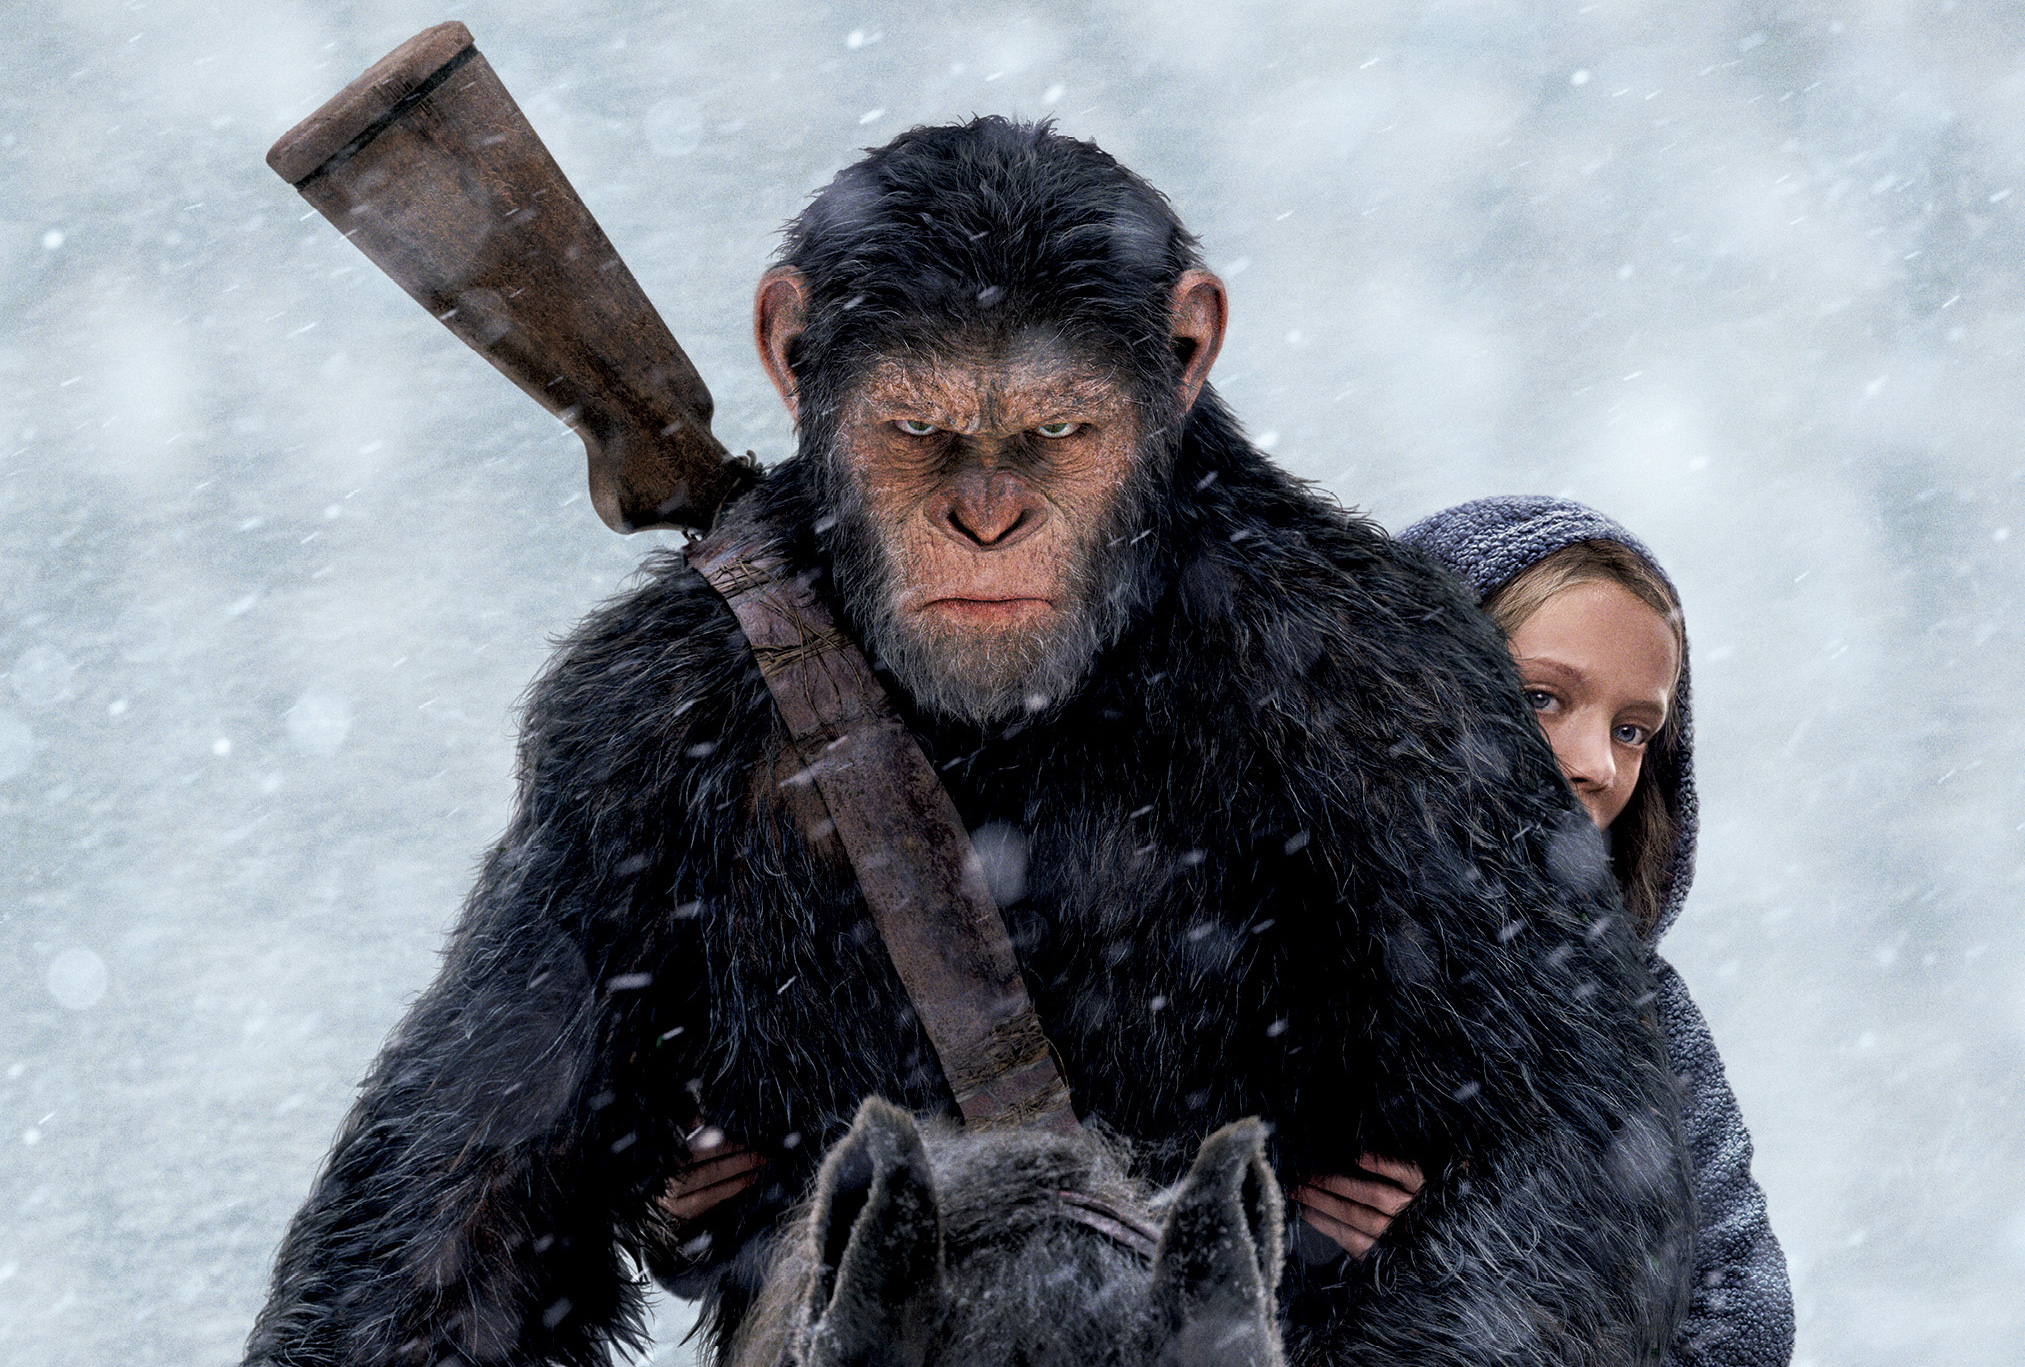 Watch War For The Planet Of The Apes War For The Planet Of The Apes Movie Still Wallpaper, HD Movies 4K